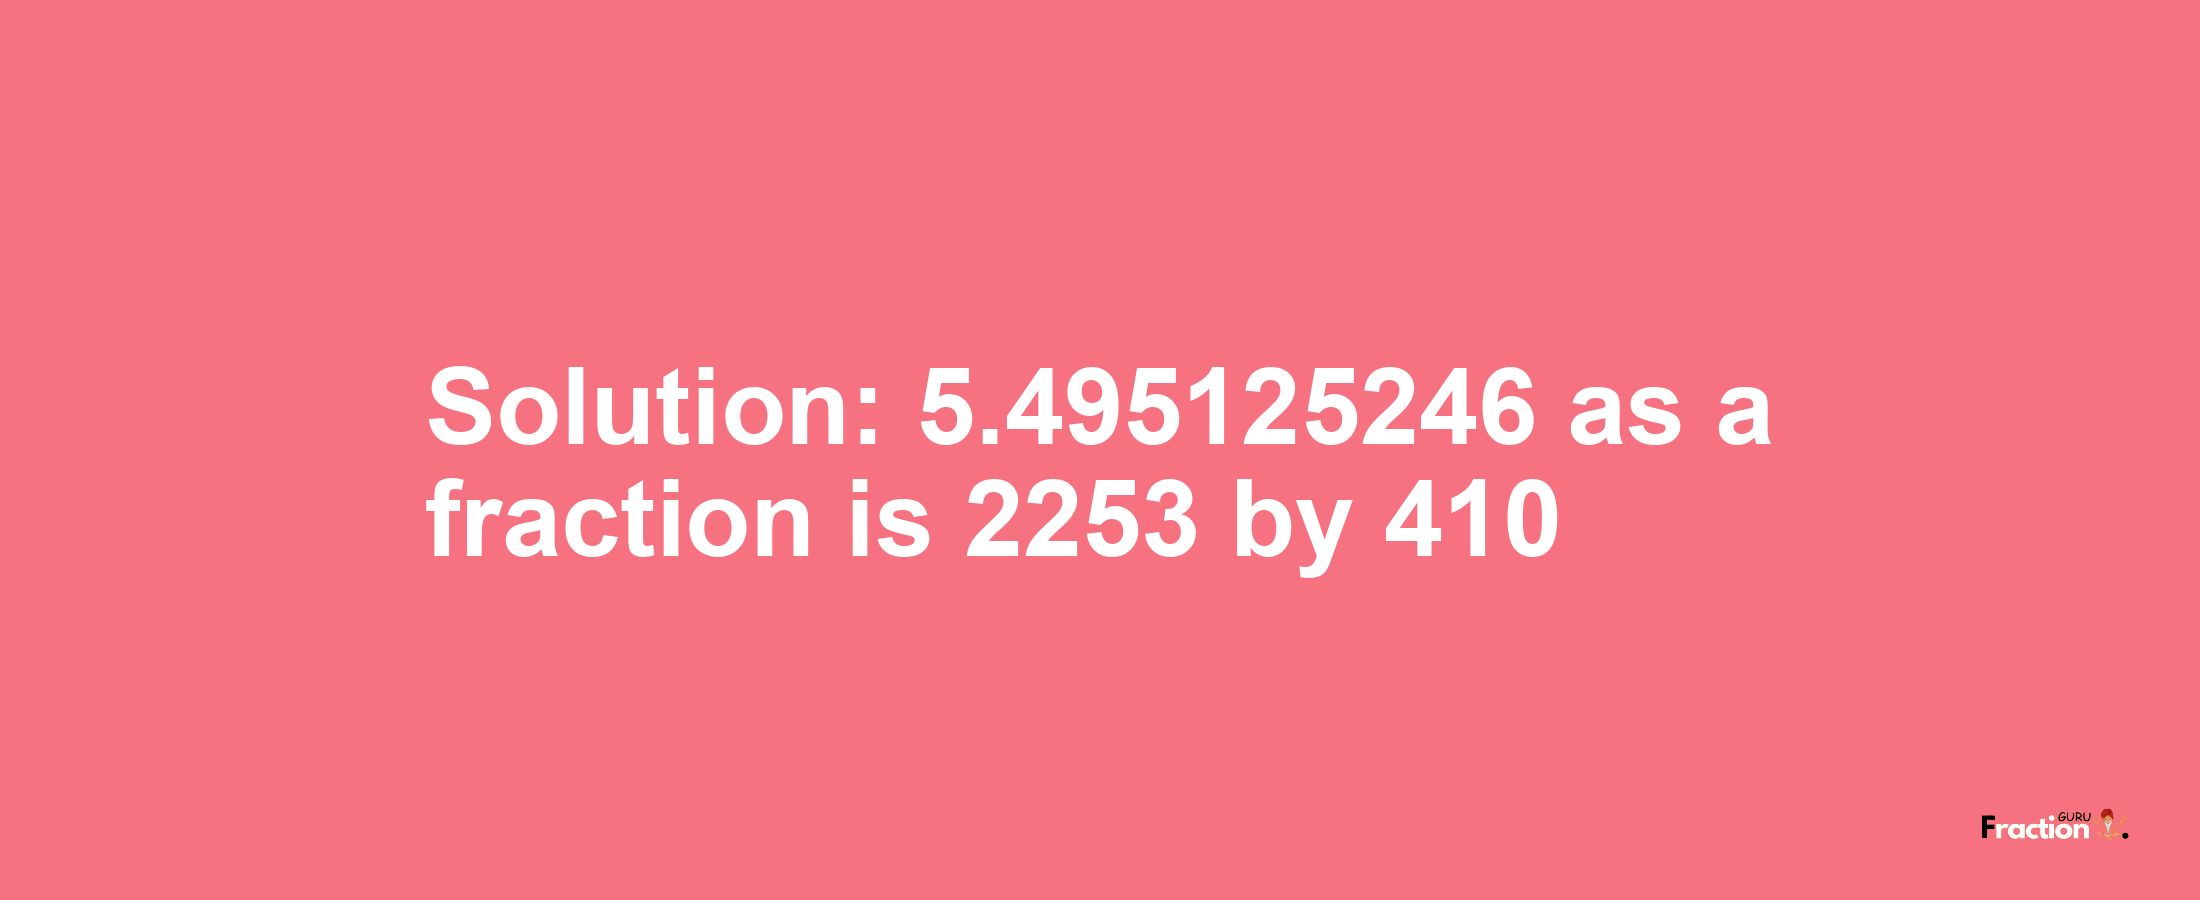 Solution:5.495125246 as a fraction is 2253/410